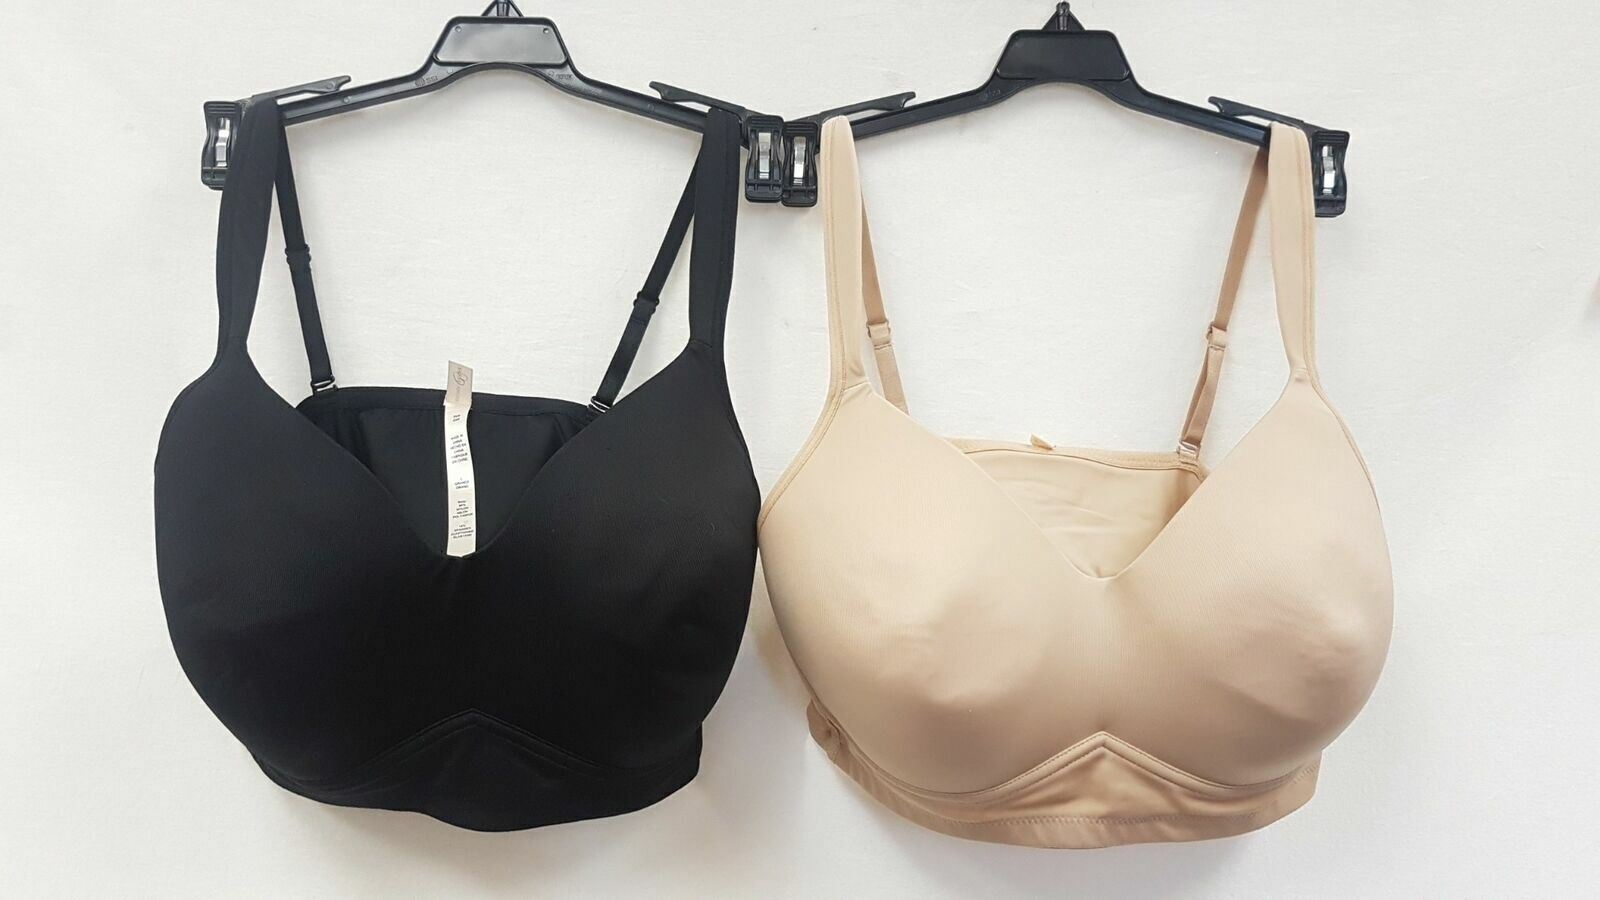 LOT OF 2 Rhonda Shear #0024 Molded Cup Wireless Bras - CHOOSE COLOR PACK